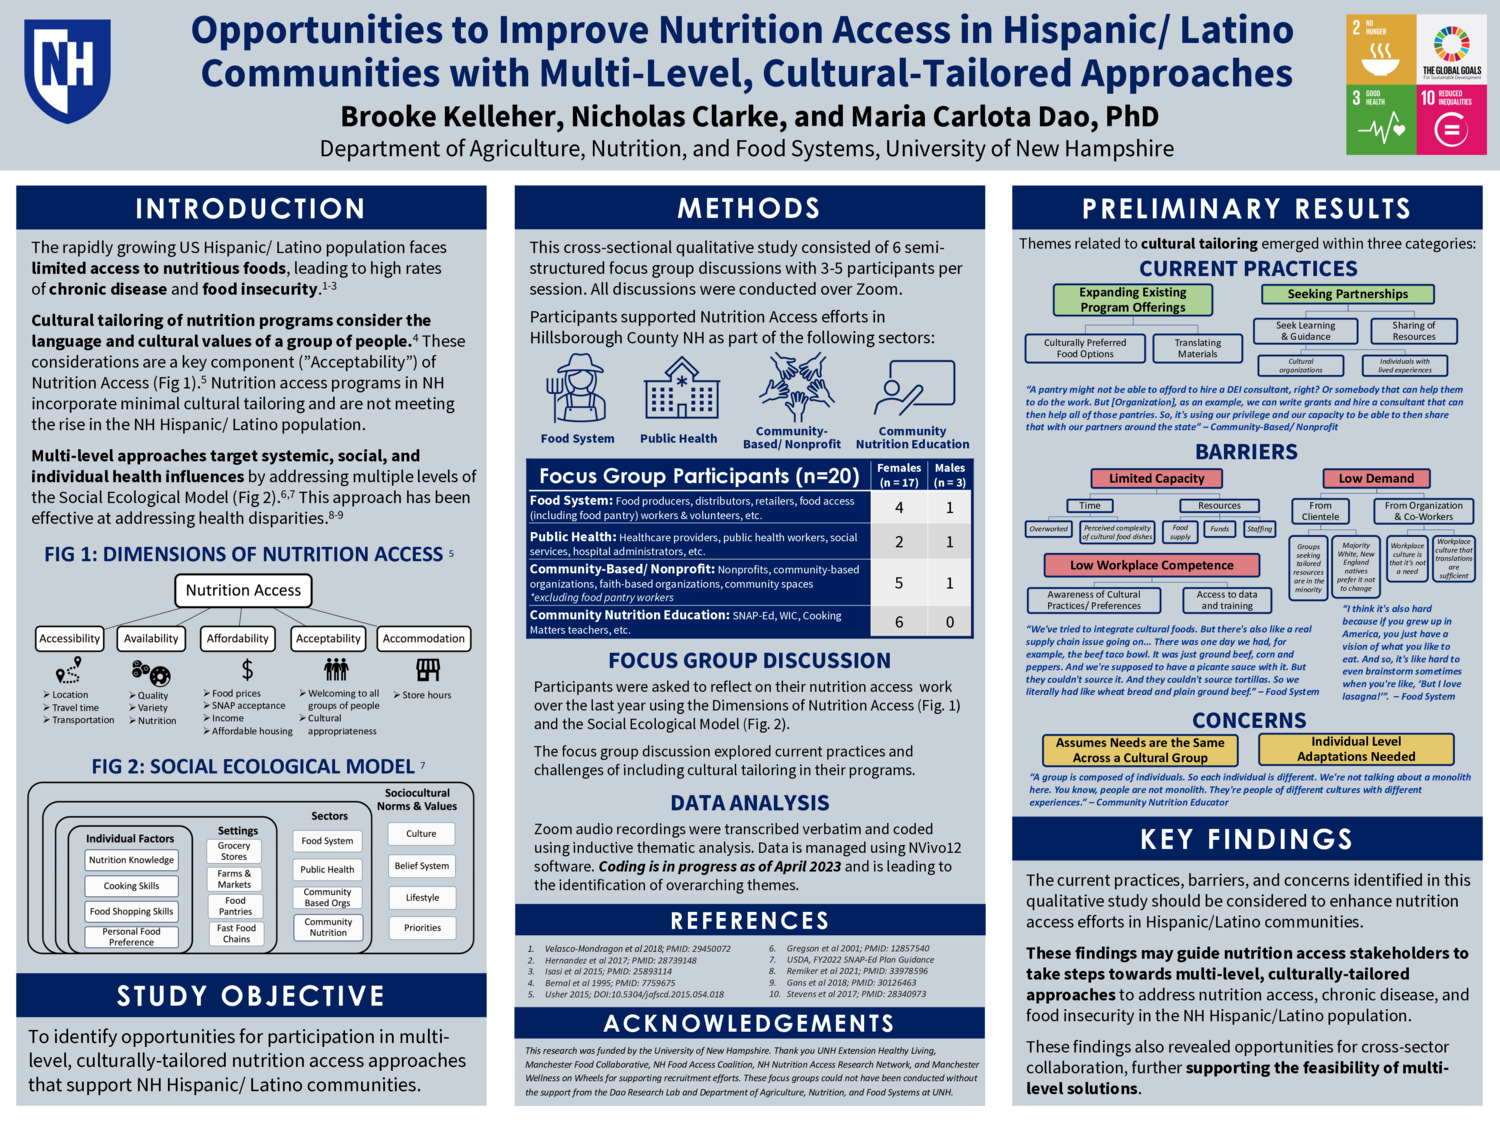 Opportunities To Improve Nutrition Access In Hispanic/ Latino Communities With Multi-Level, Cultural-Tailored Approaches by bac72